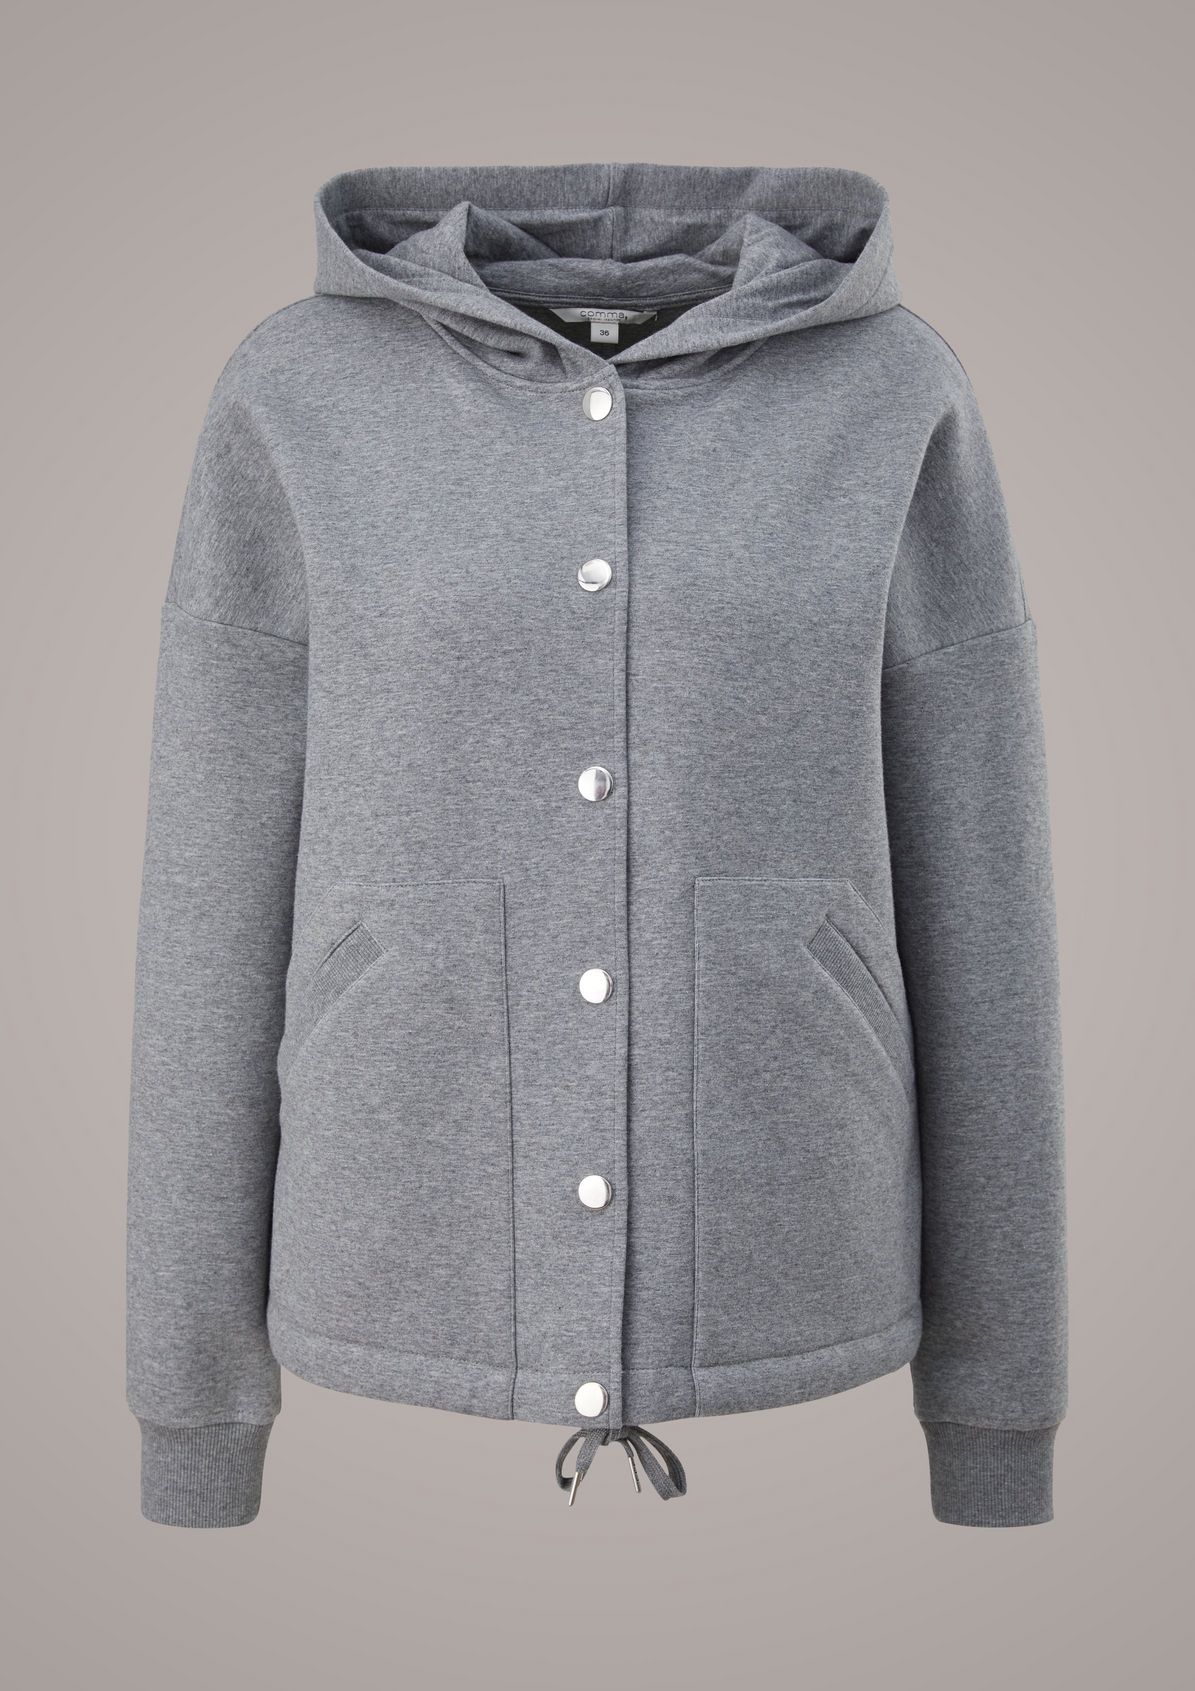 Sweatshirt jacket with a hood from comma